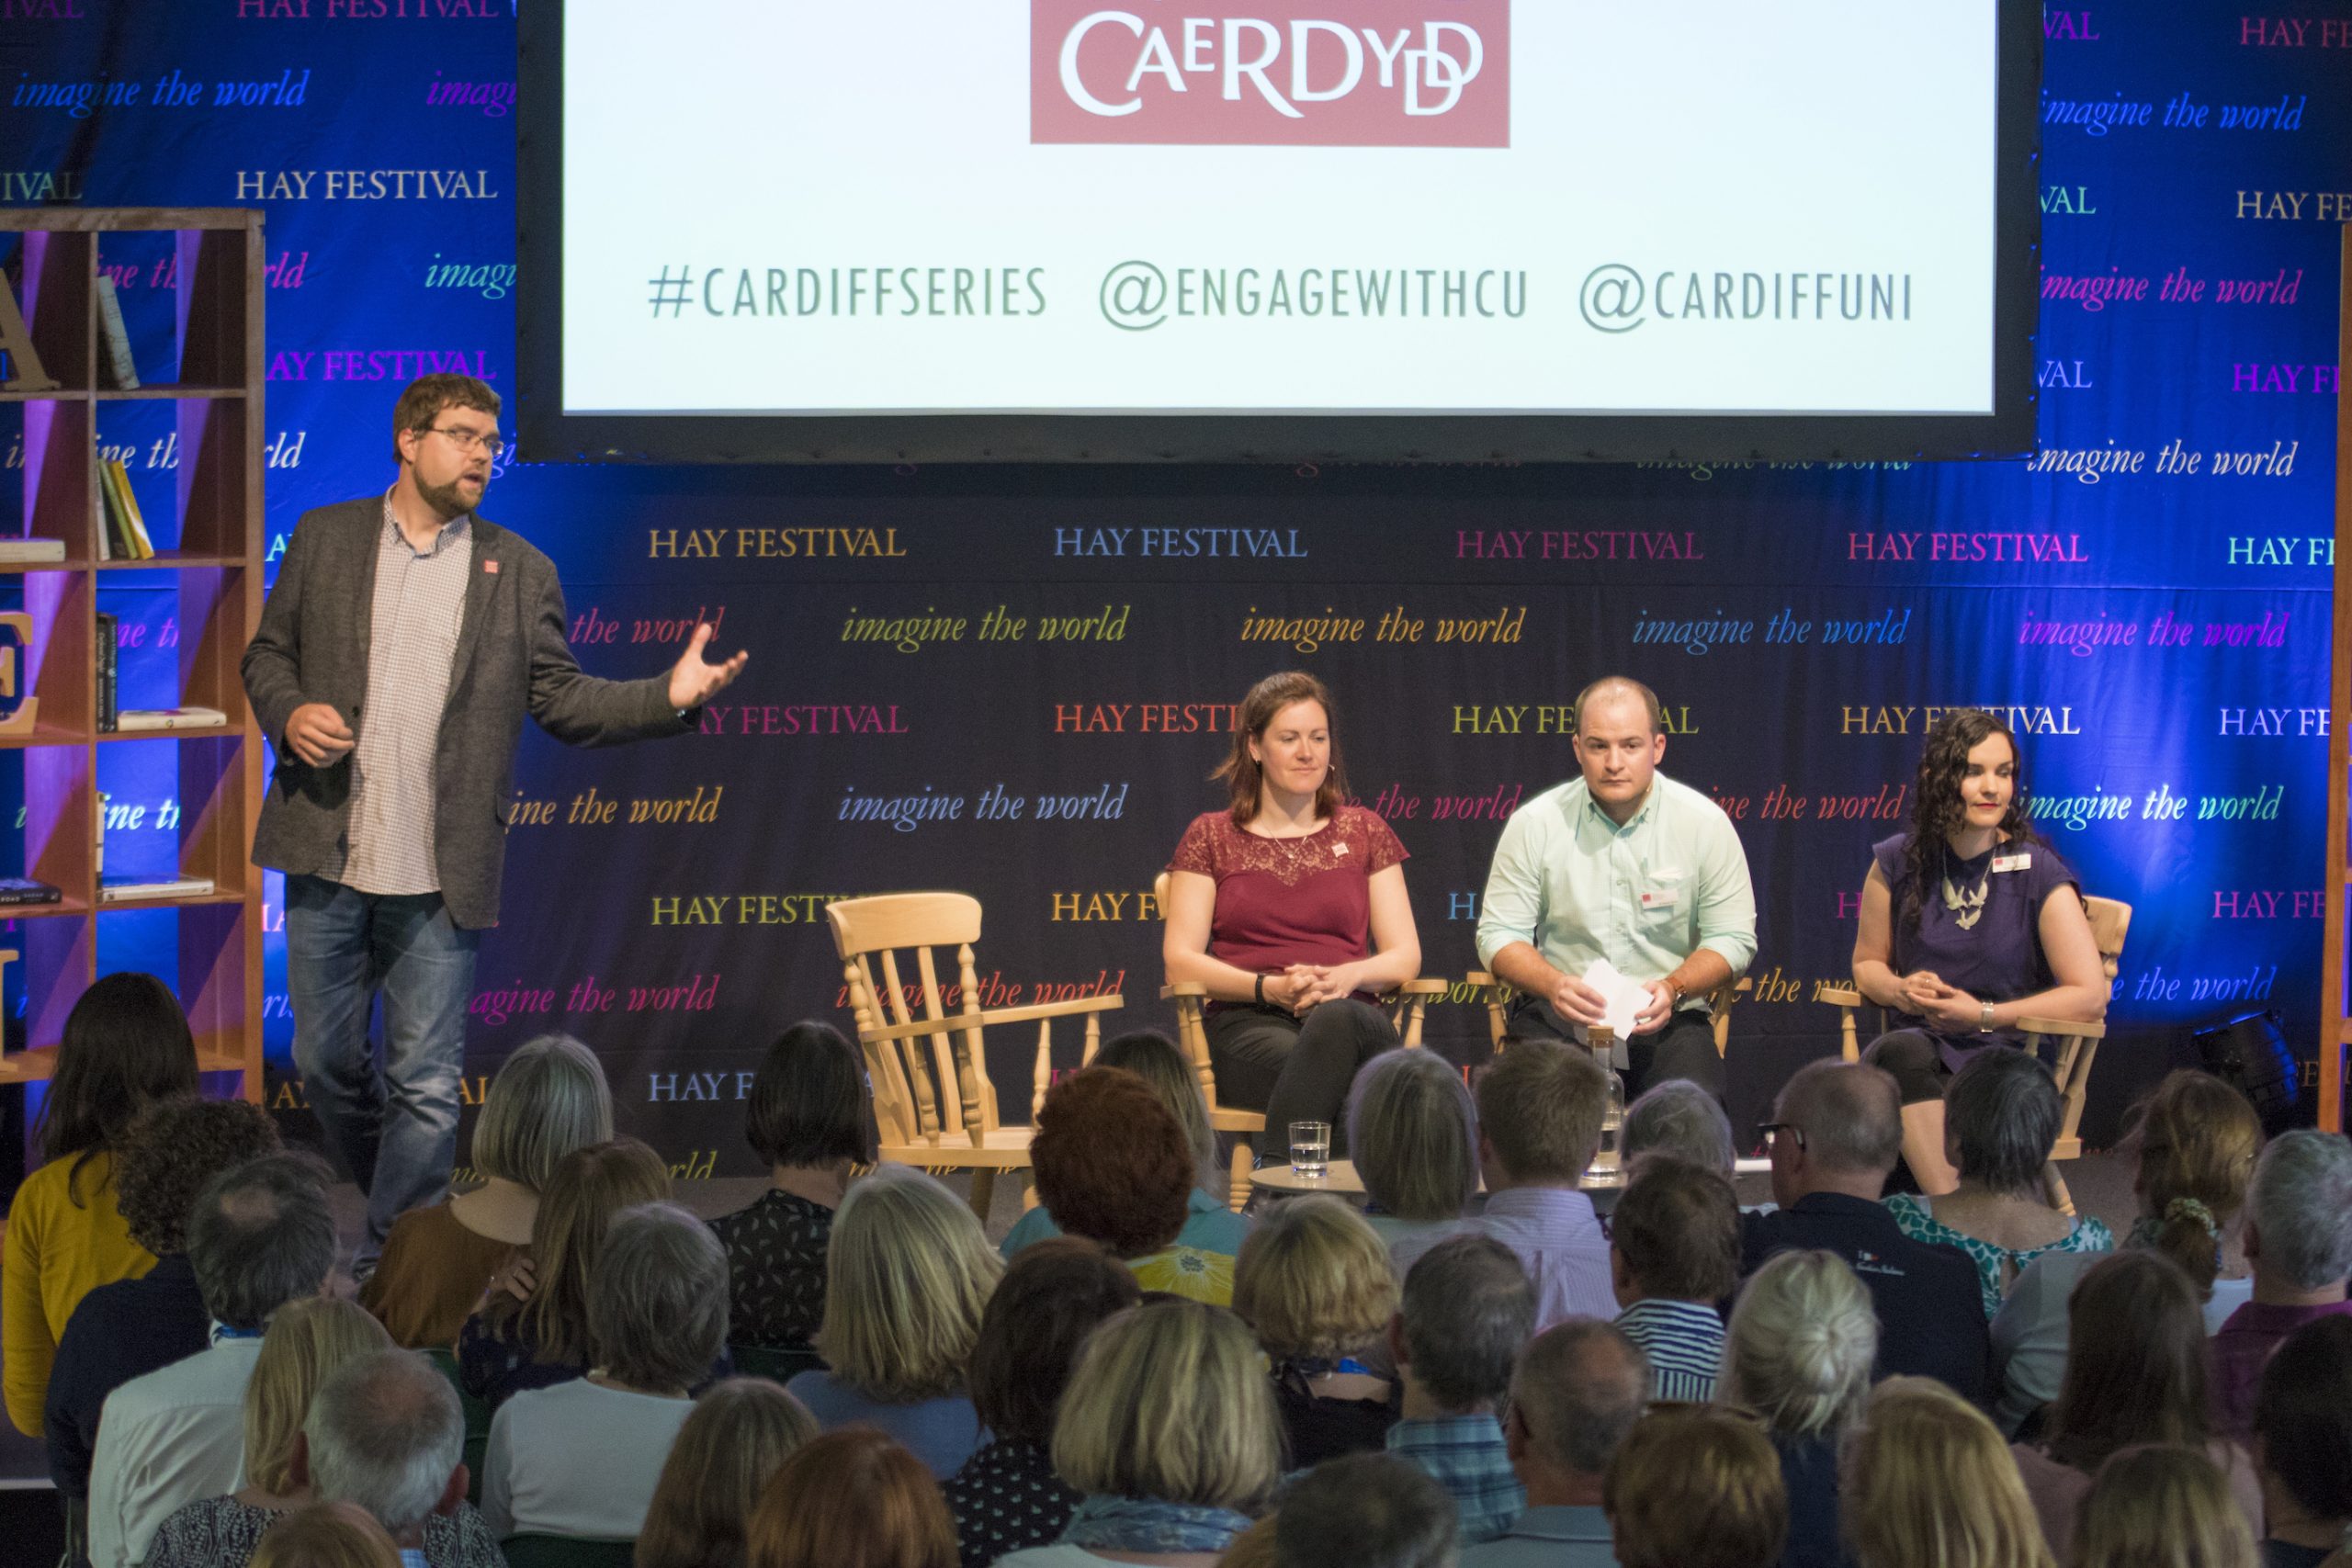 Hay Festival session